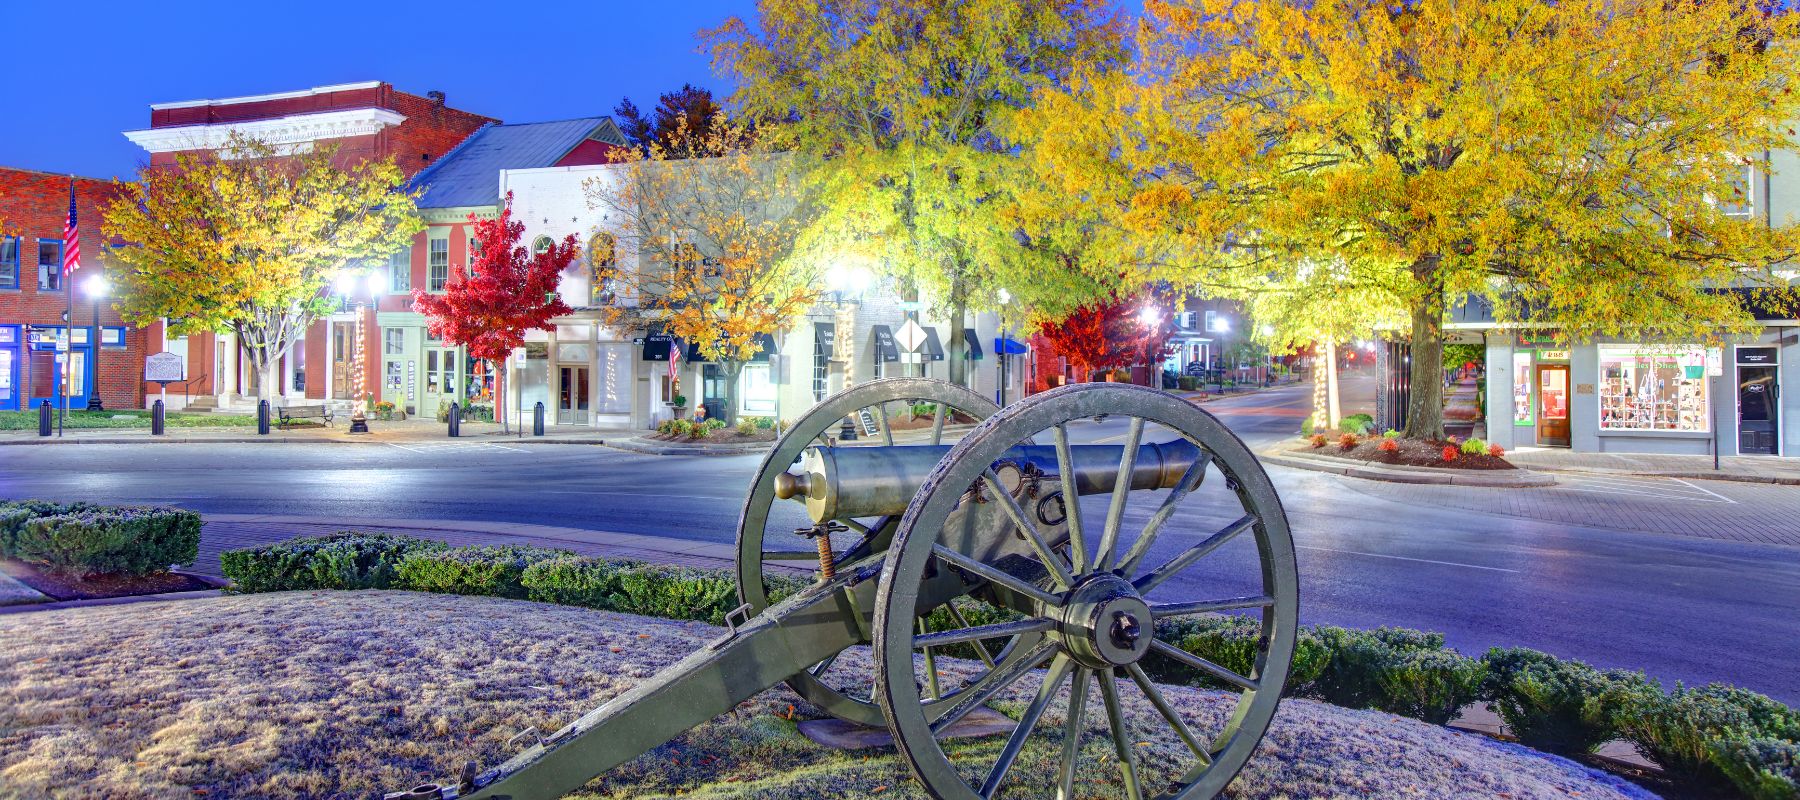 A historic town square at twilight, illuminated by street lights. Autumn leaves in vibrant yellows and reds contrast with the quaint storefronts. In the foreground, a cannon on display signifies historical significance, adding a sense of heritage to this serene setting